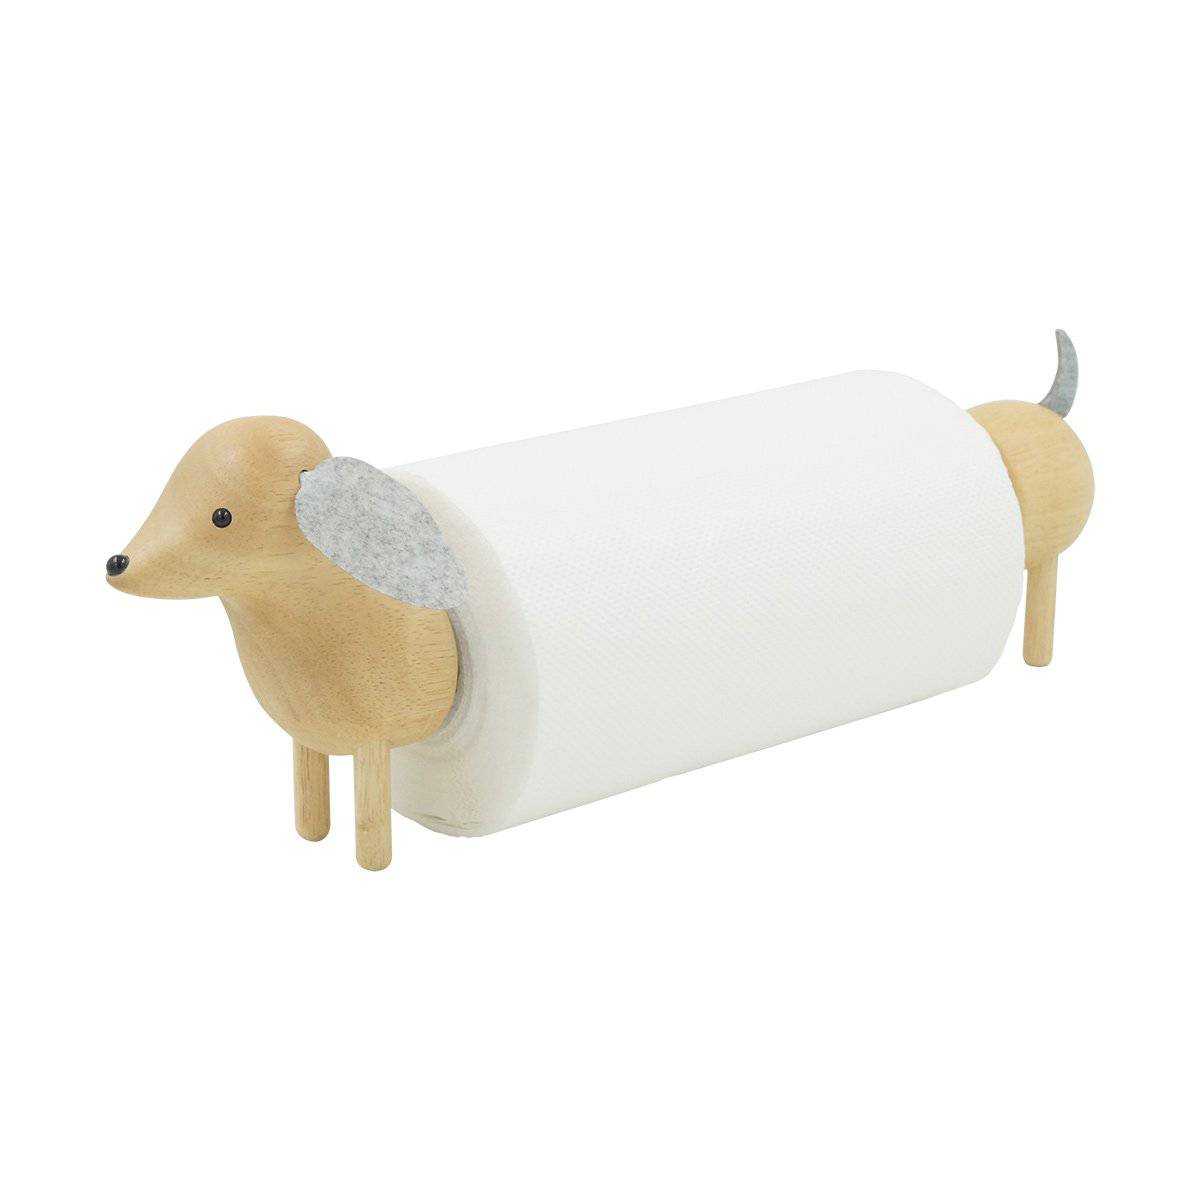 Dachshund Paper Towel Holder by Peterson Housewares